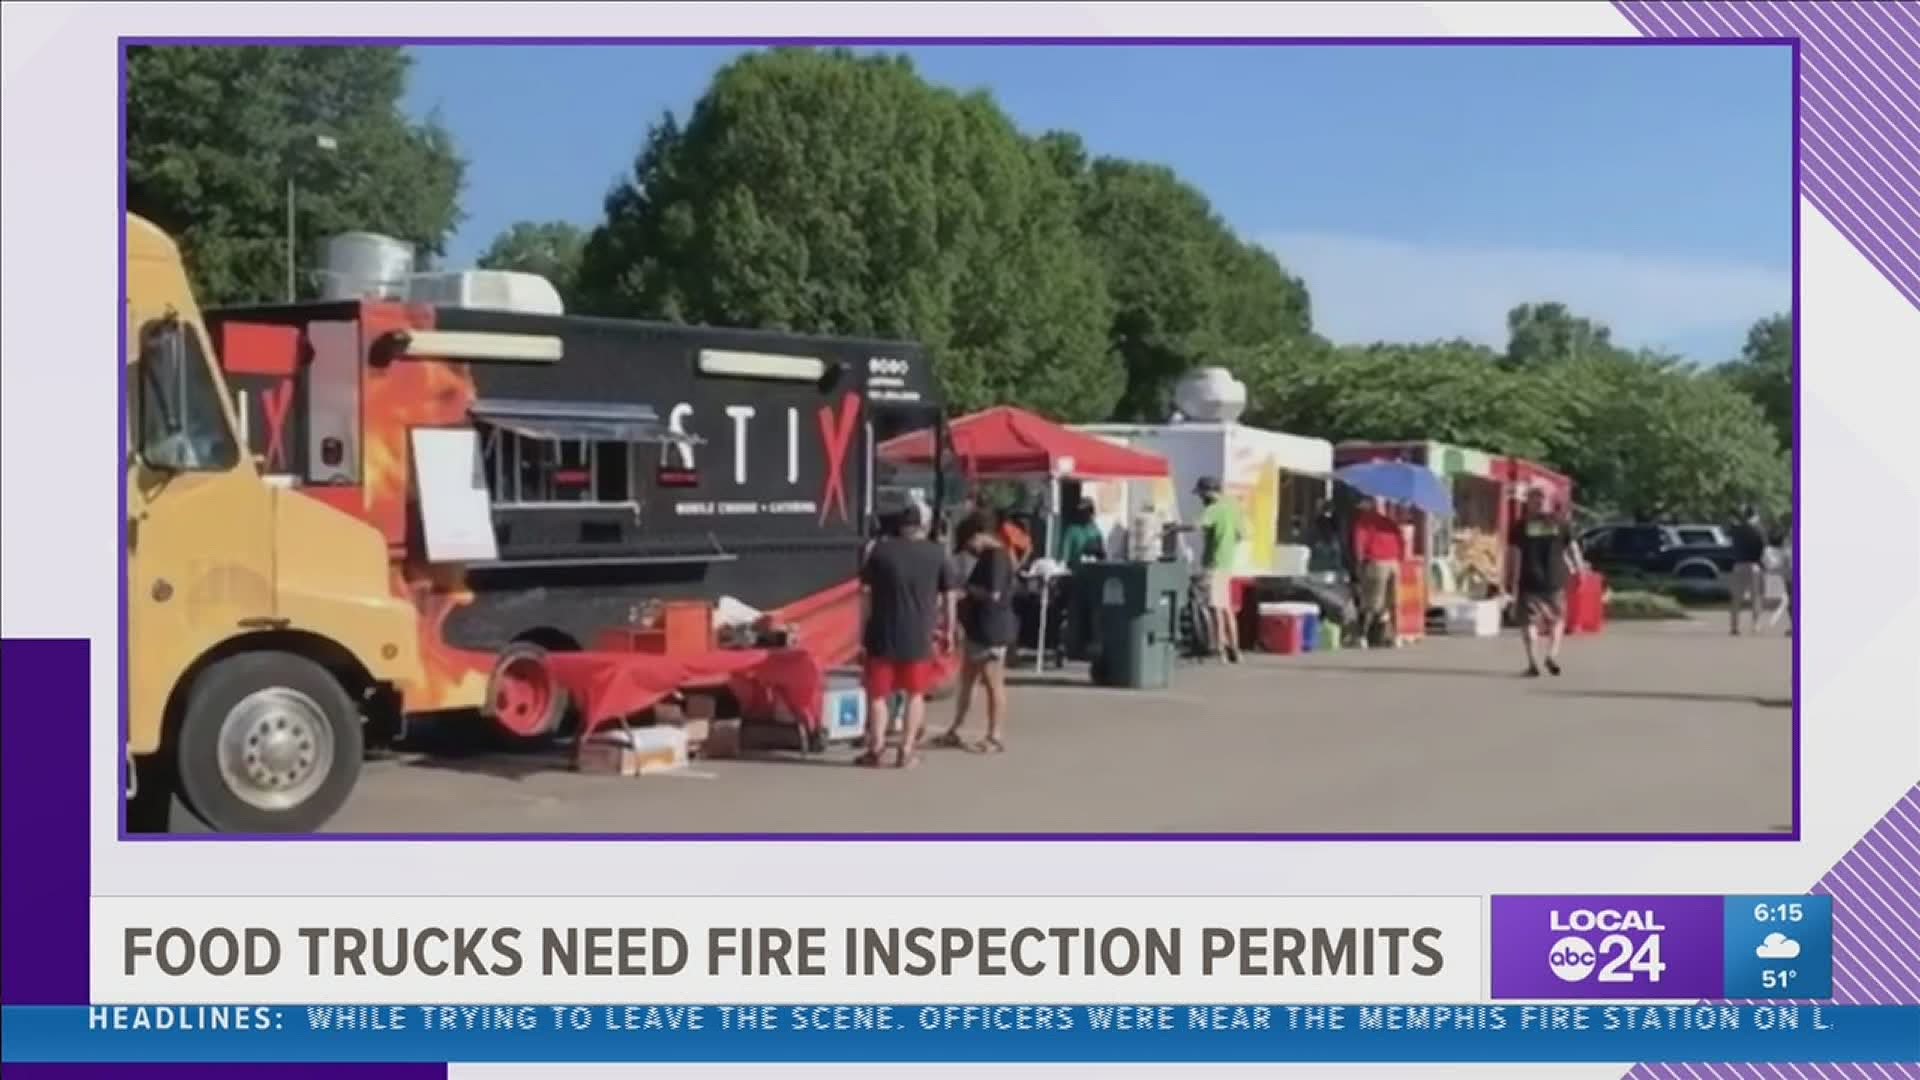 A permit following the inspection will be issued for one-year, and must be handled before any events in Collierville.